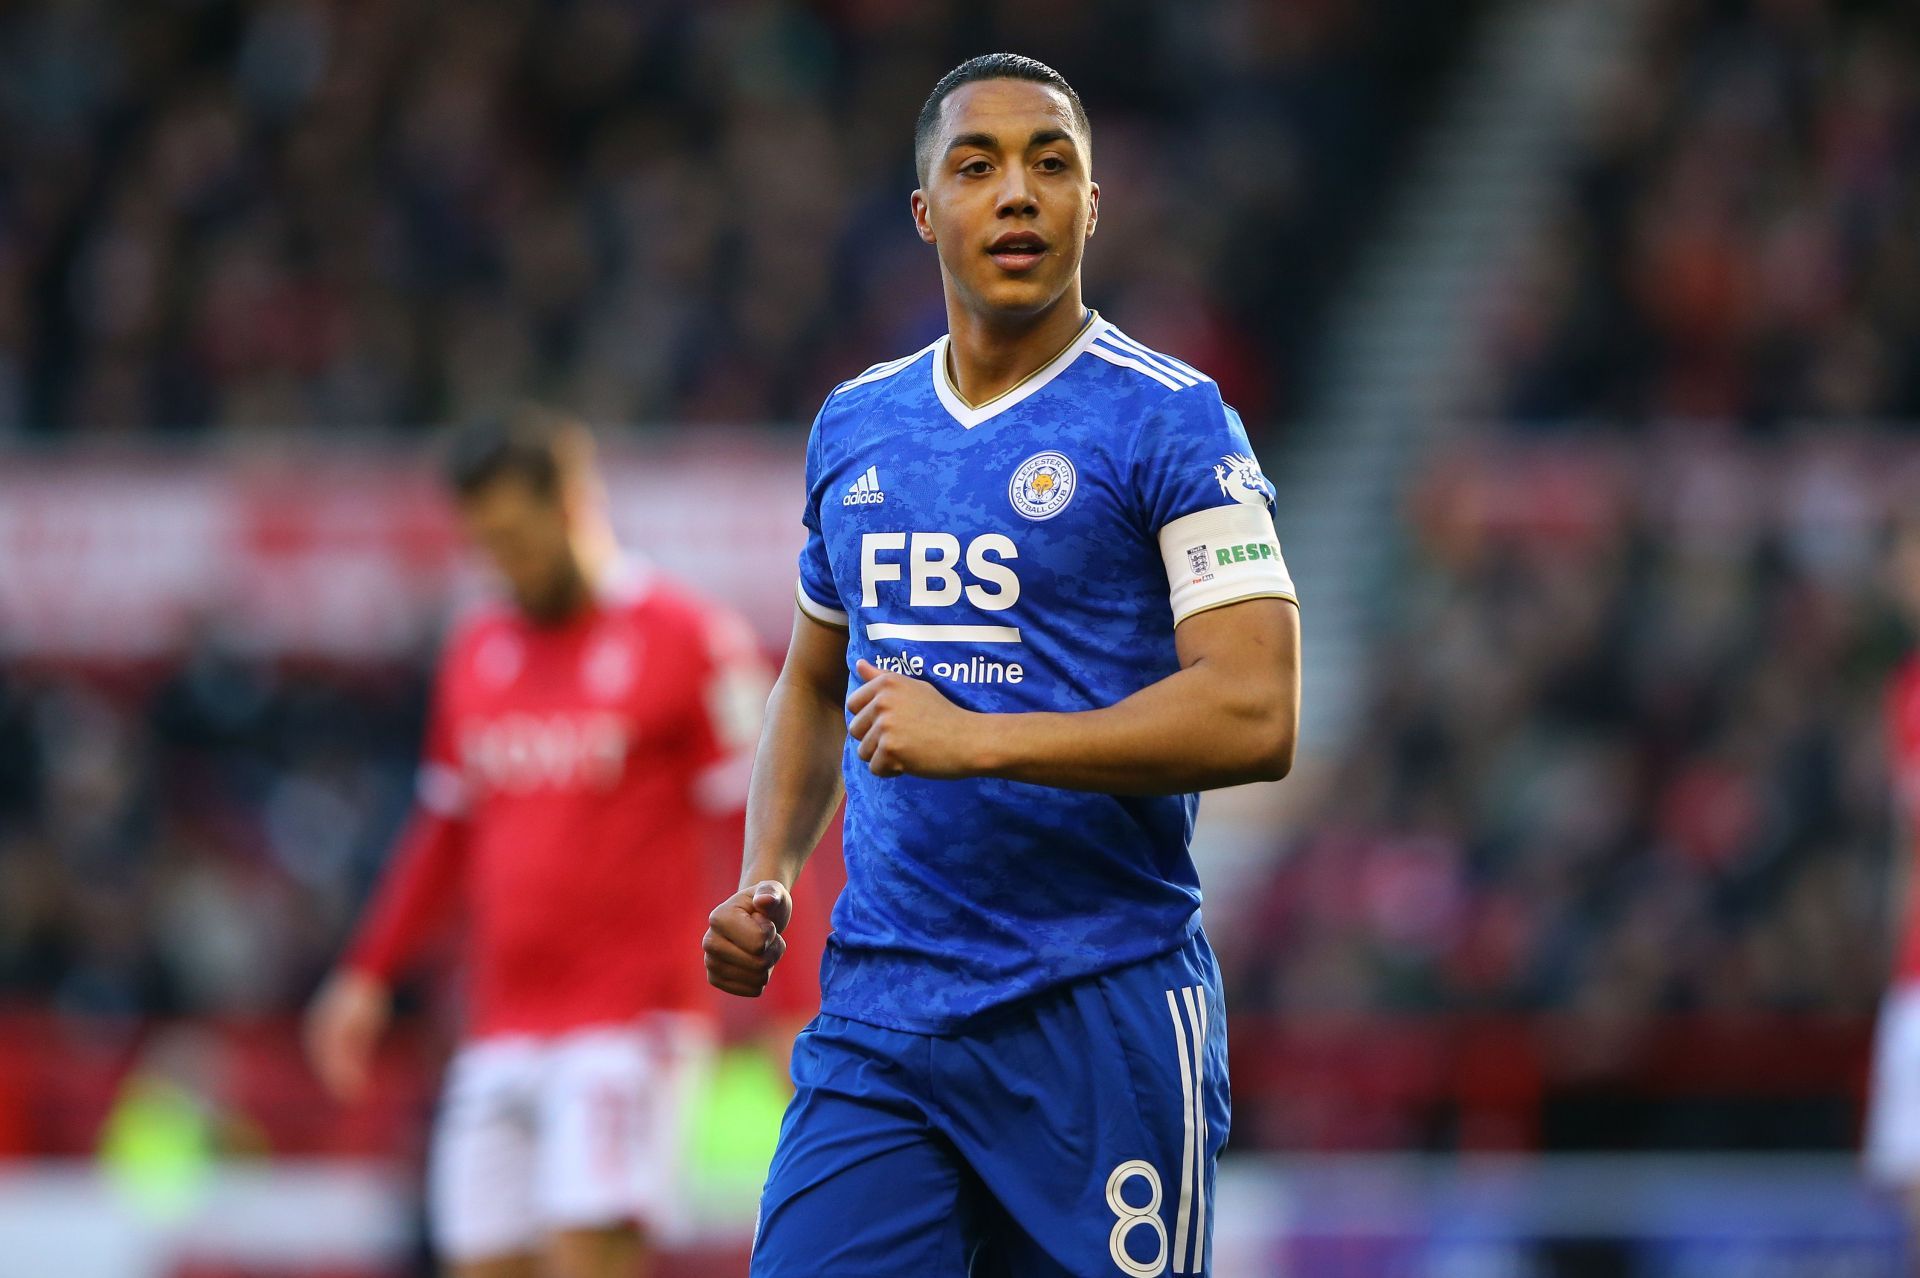 Arsenal have been handed a boost in their pursuit of Youri Tielemans.